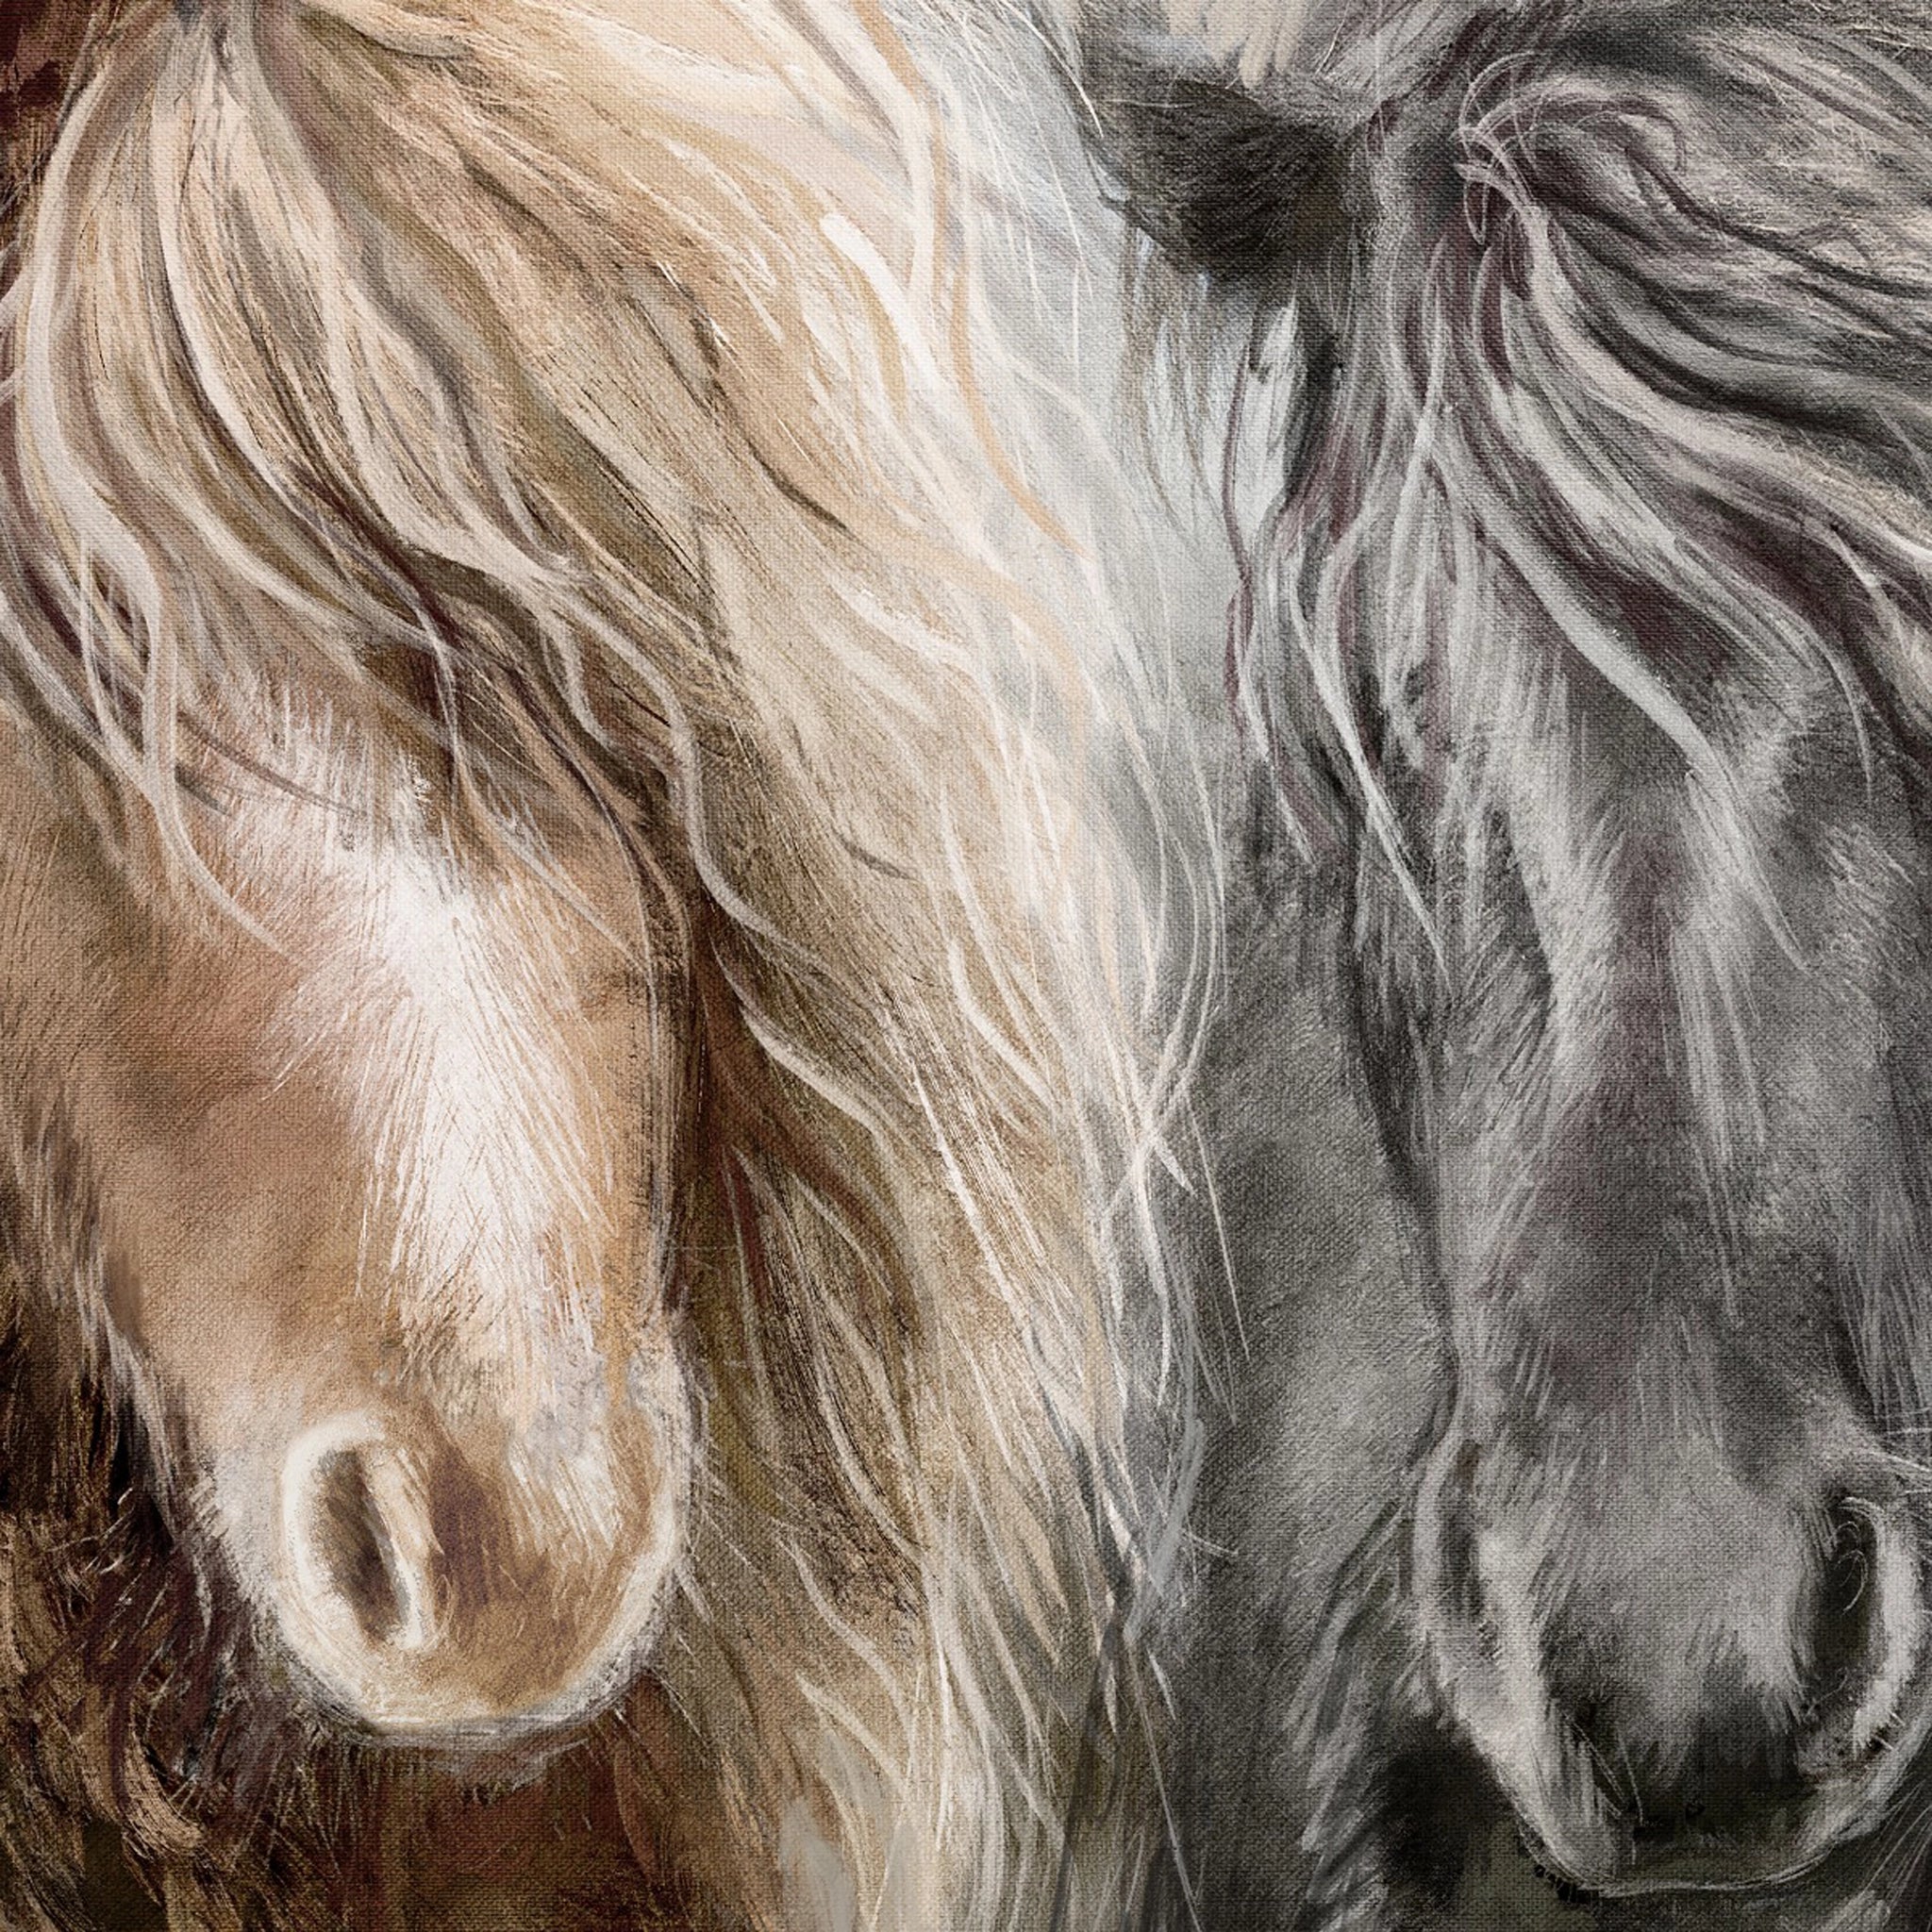 Detailed close-up of brown and black pony.